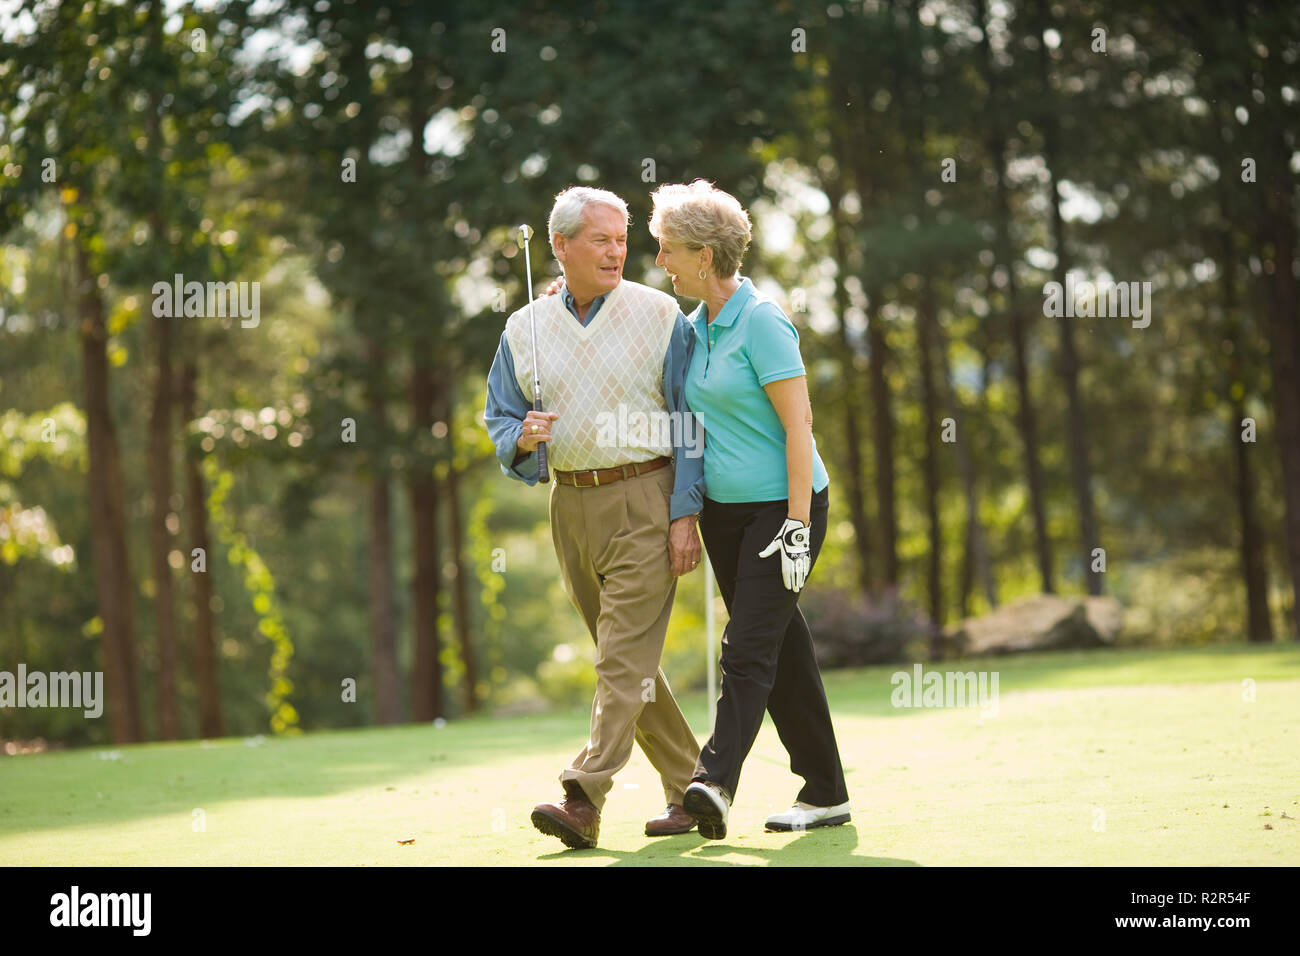 Older couple walking on golf course Stock Photo